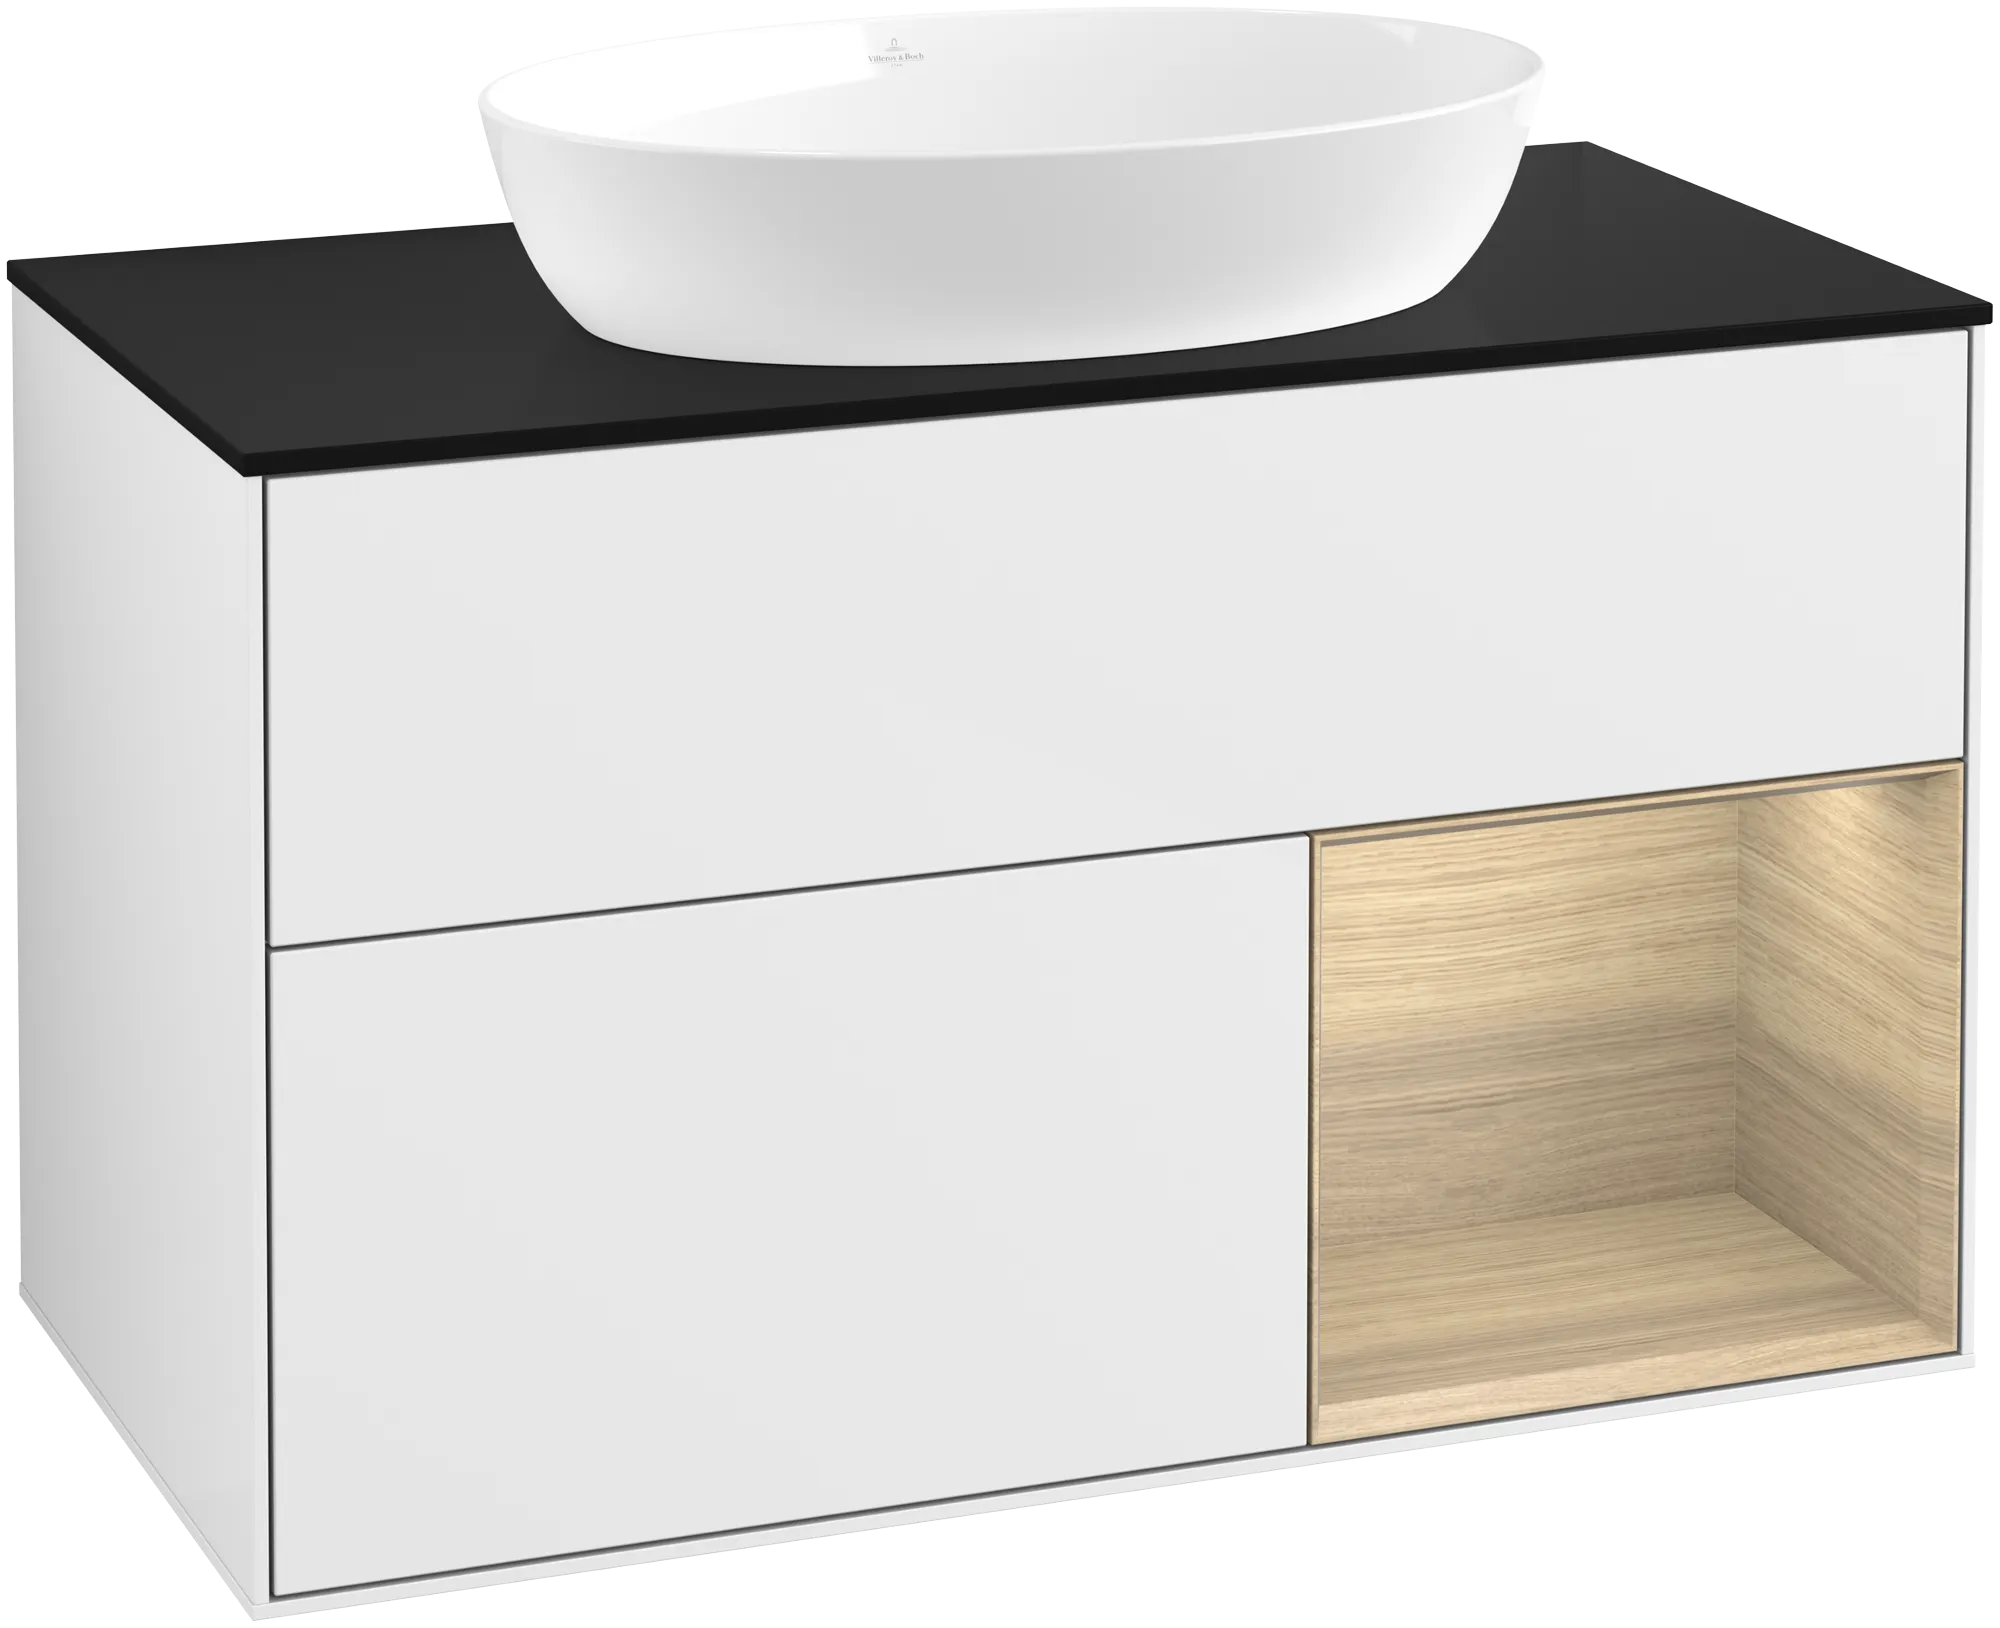 Picture of VILLEROY BOCH Finion Vanity unit, with lighting, 2 pull-out compartments, 1000 x 603 x 501 mm, Glossy White Lacquer / Oak Veneer / Glass Black Matt #GA22PCGF